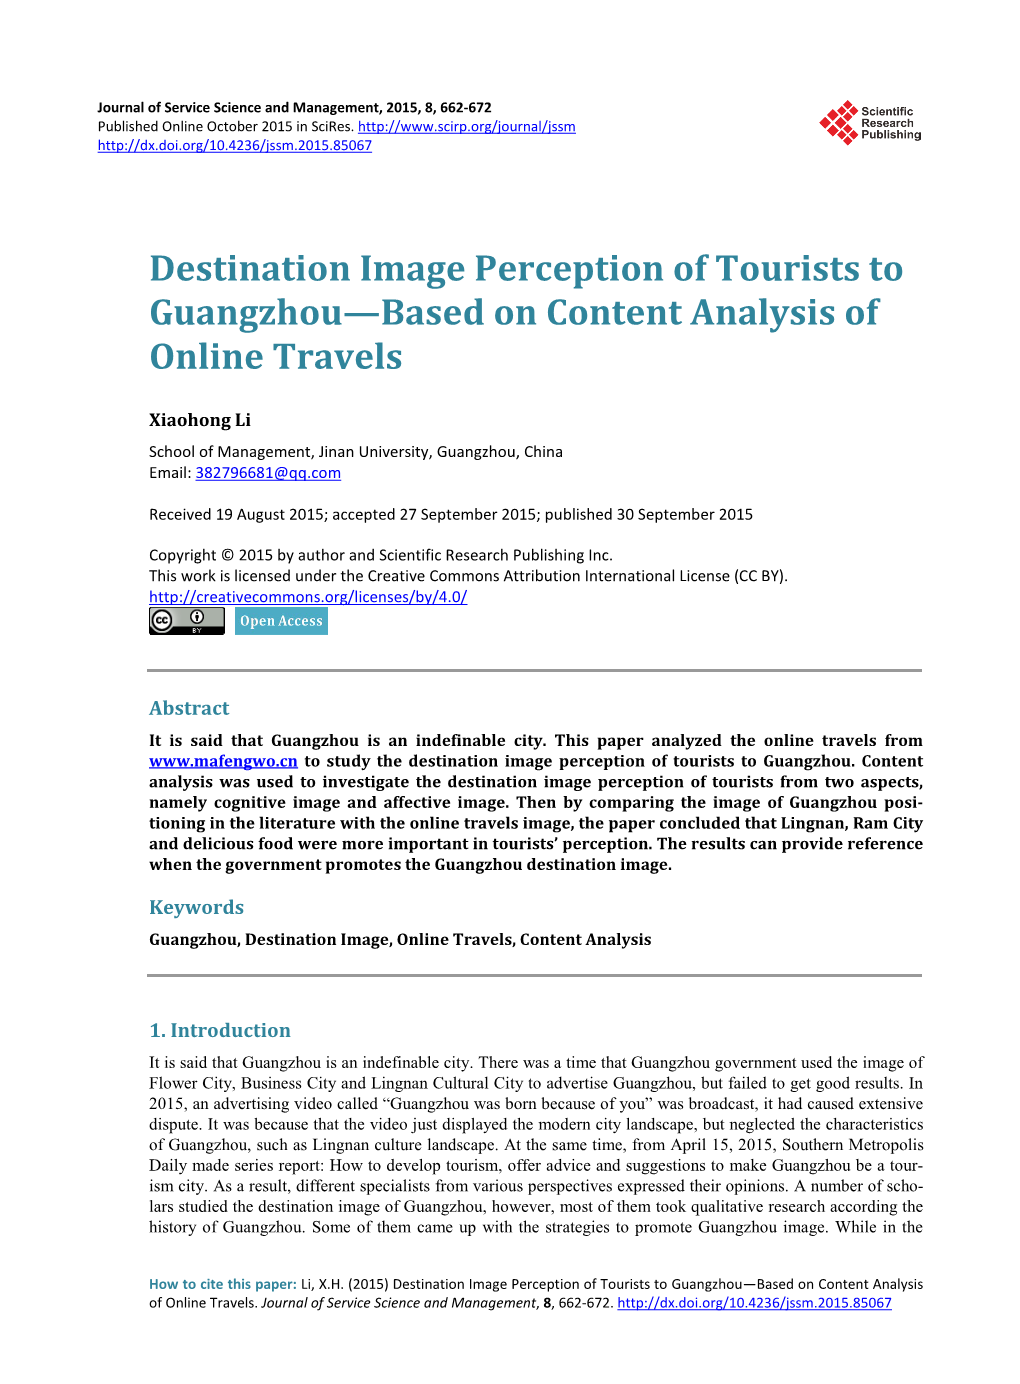 Destination Image Perception of Tourists to Guangzhou—Based on Content Analysis of Online Travels